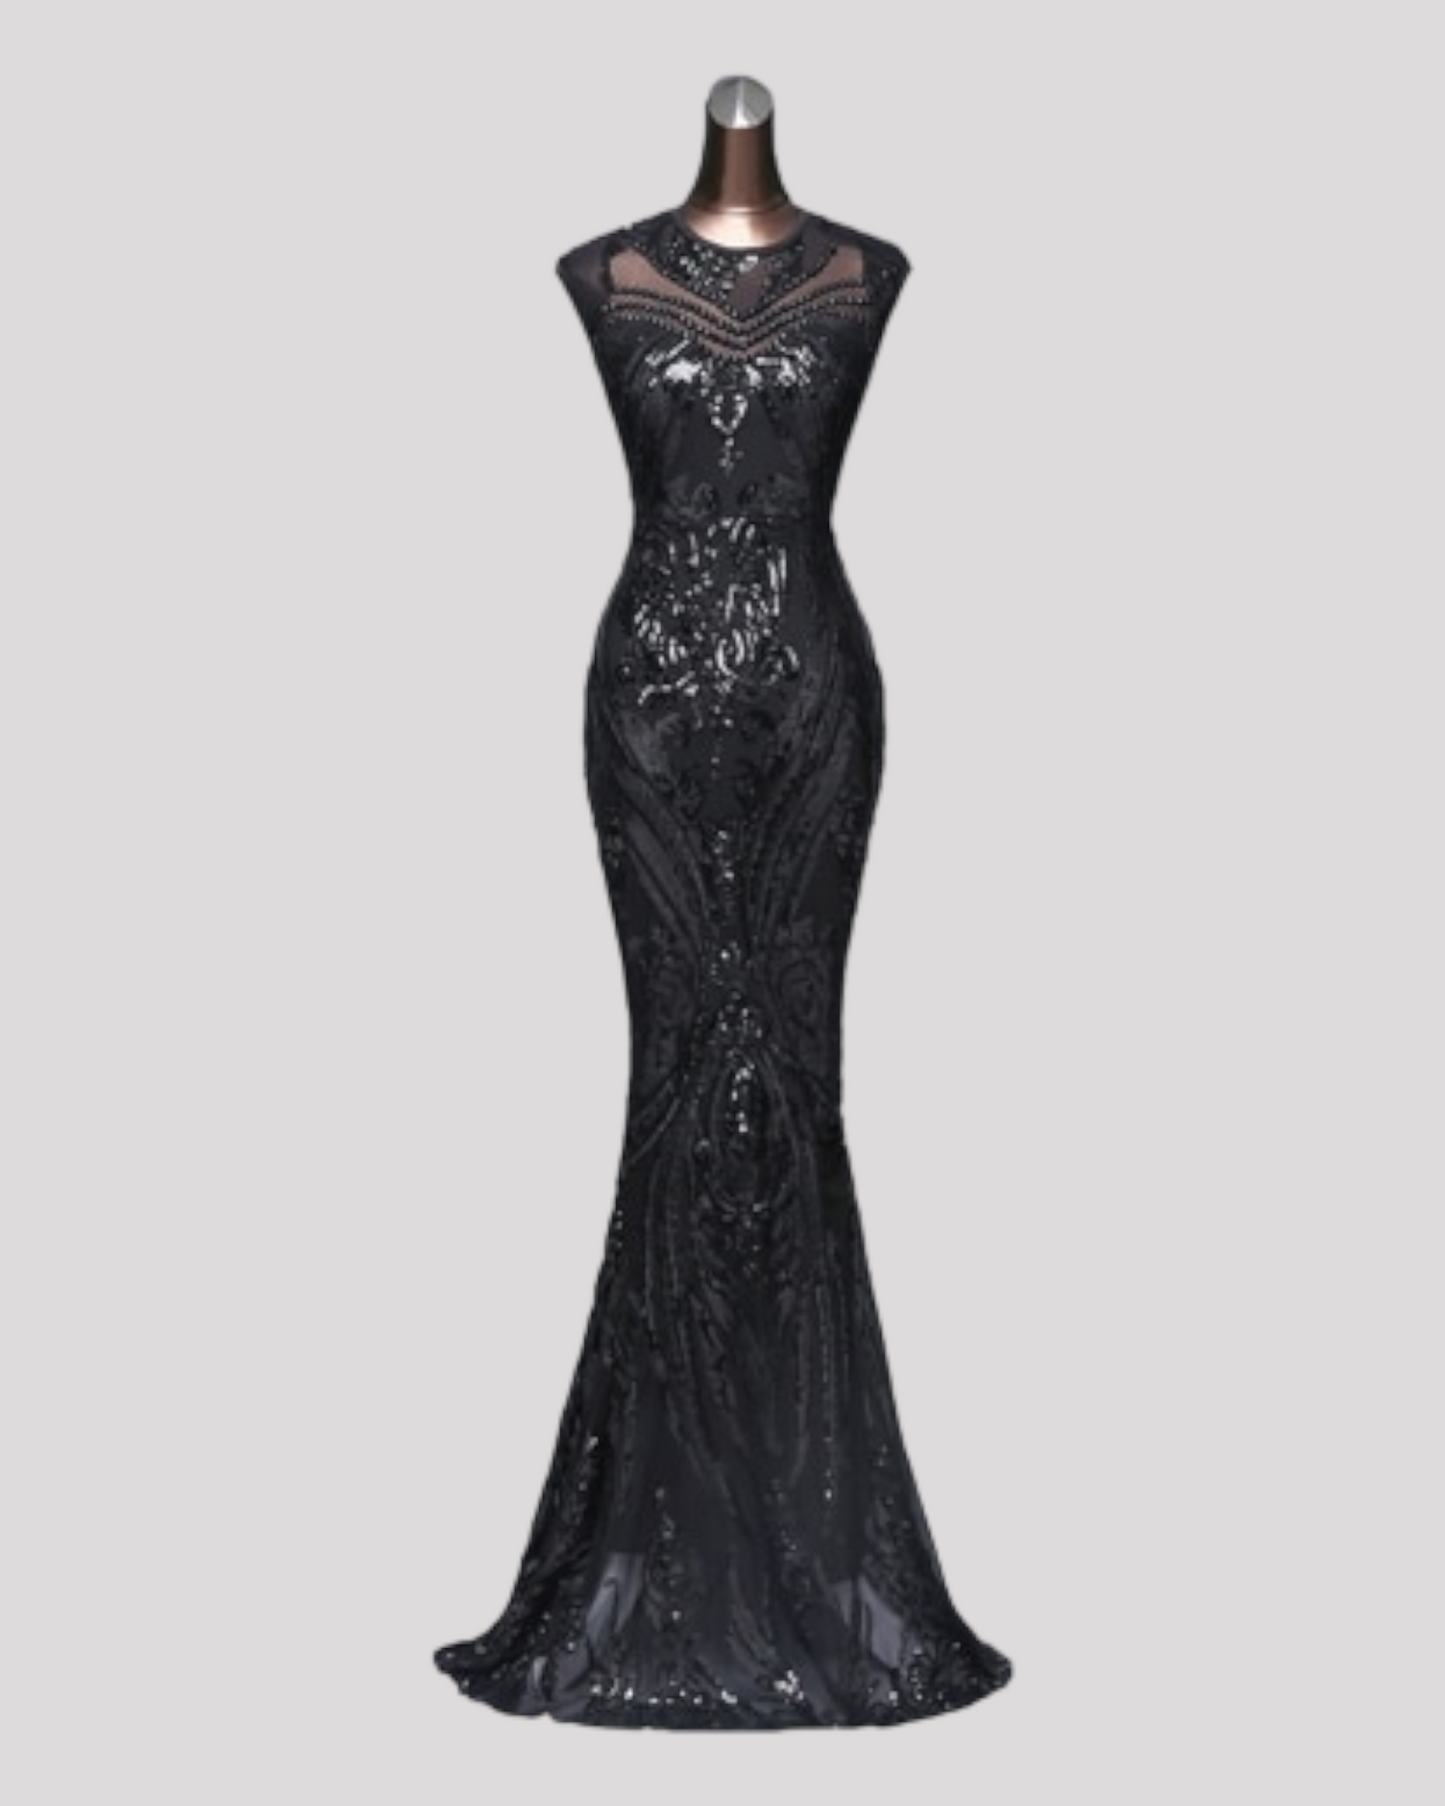 Beautiful Sequin Mermaid Style Evening Dress with high Neck and Cut out Back Feature